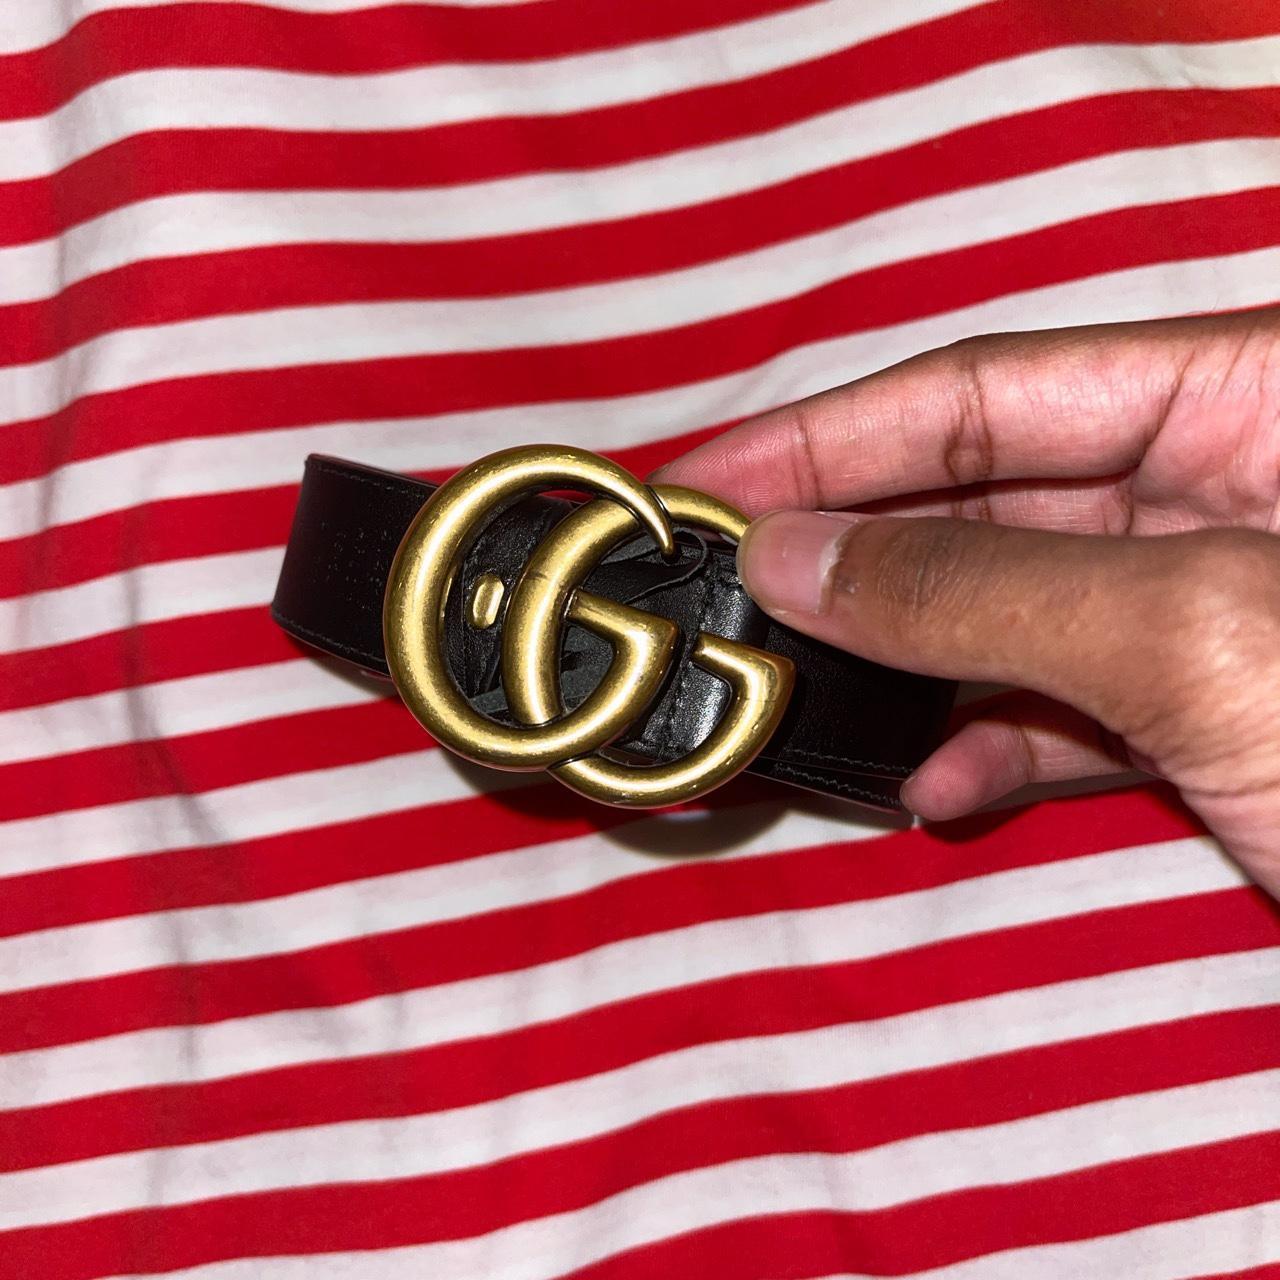 NEW Gucci Leather Belt with Double G Gold Buckle - Depop